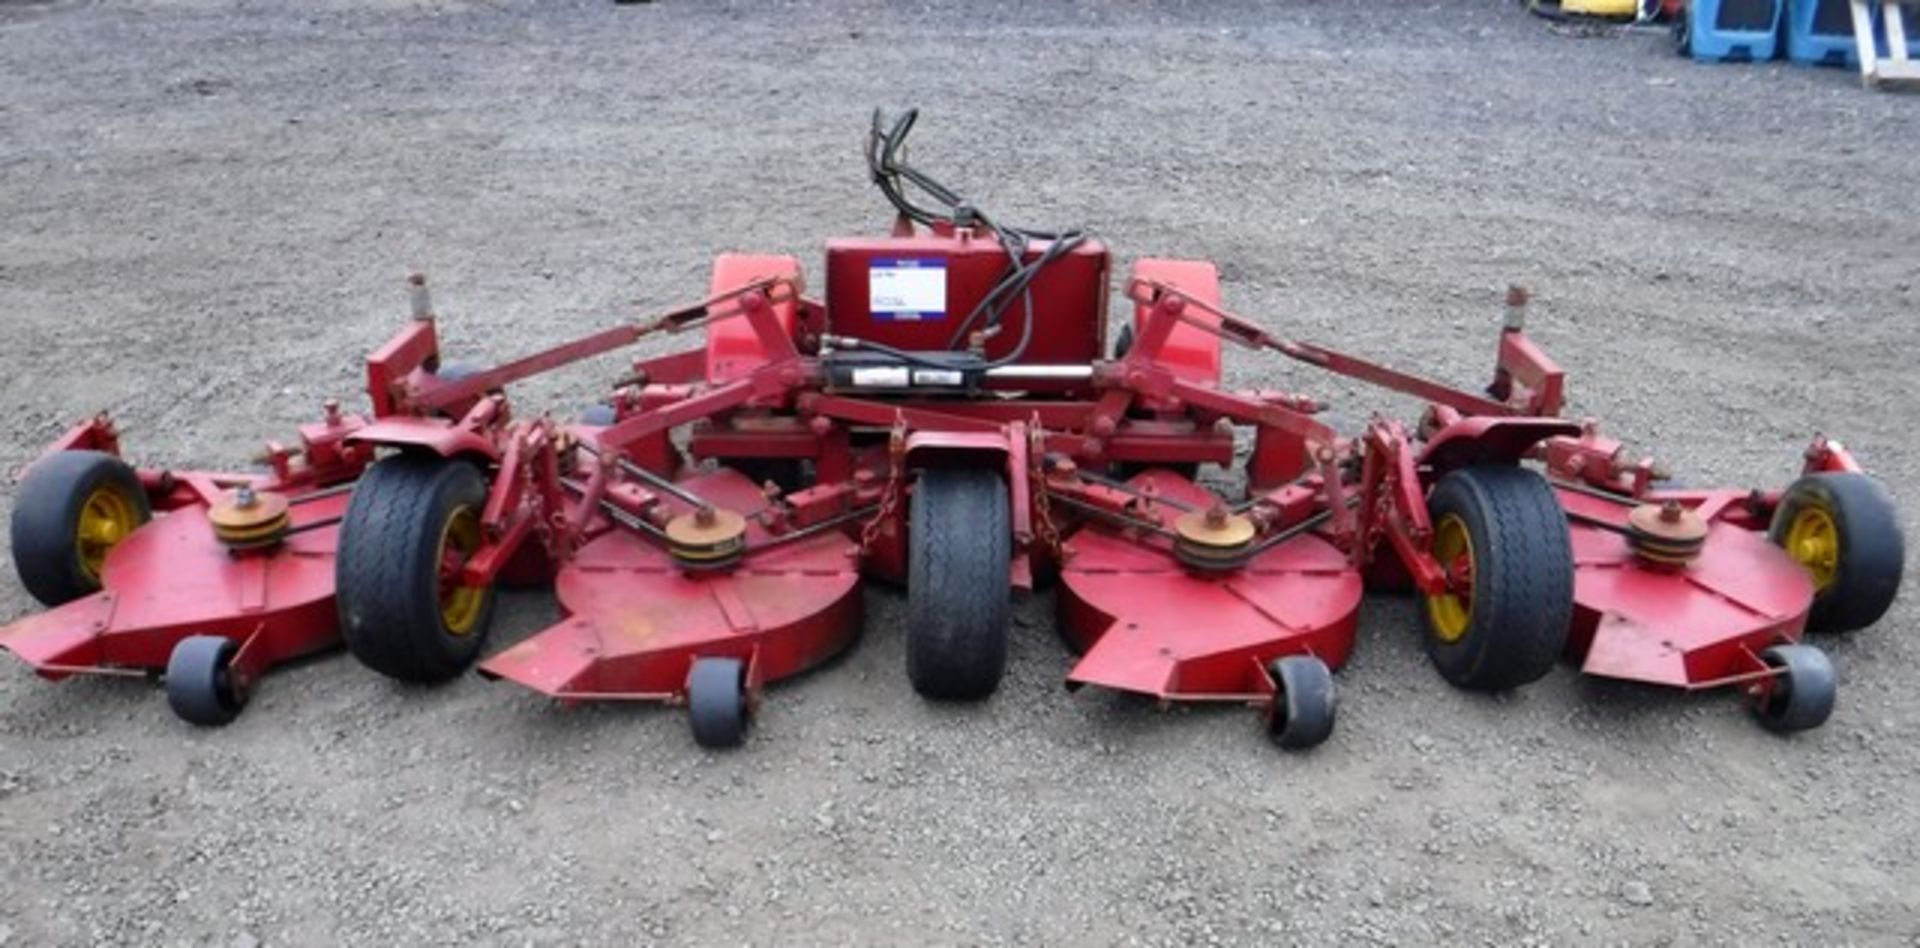 LASTEC ARTICULATOR 7 decked PTO driven grass cutter with hydraulic lift.